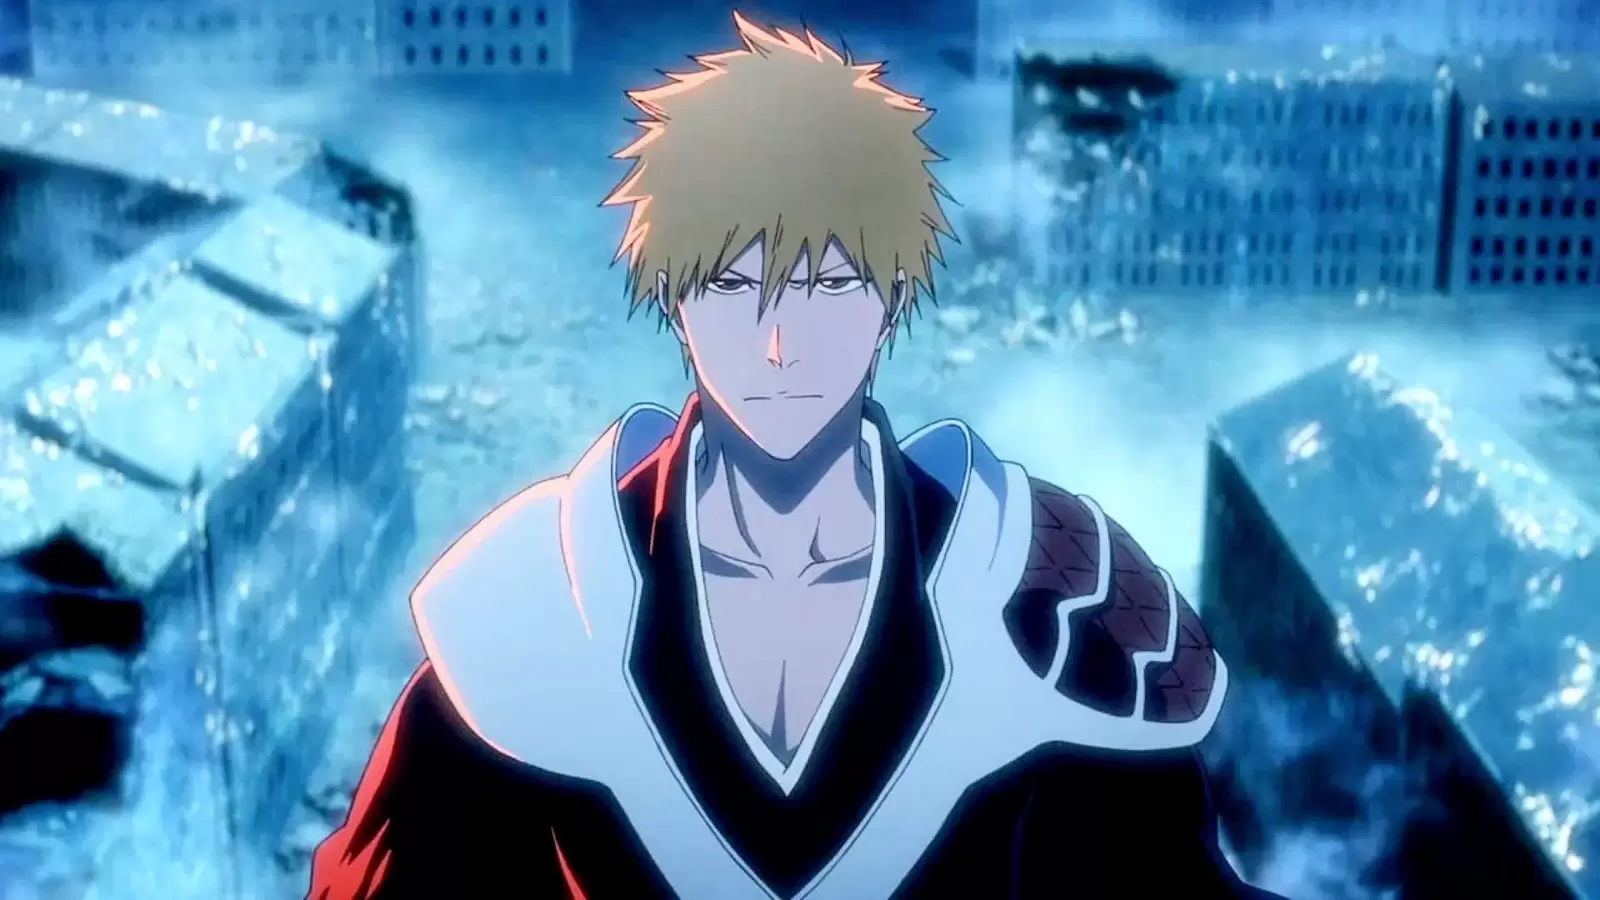 Bleach TYBW Part 2 A Thrilling Finale That Sets the Stage for More